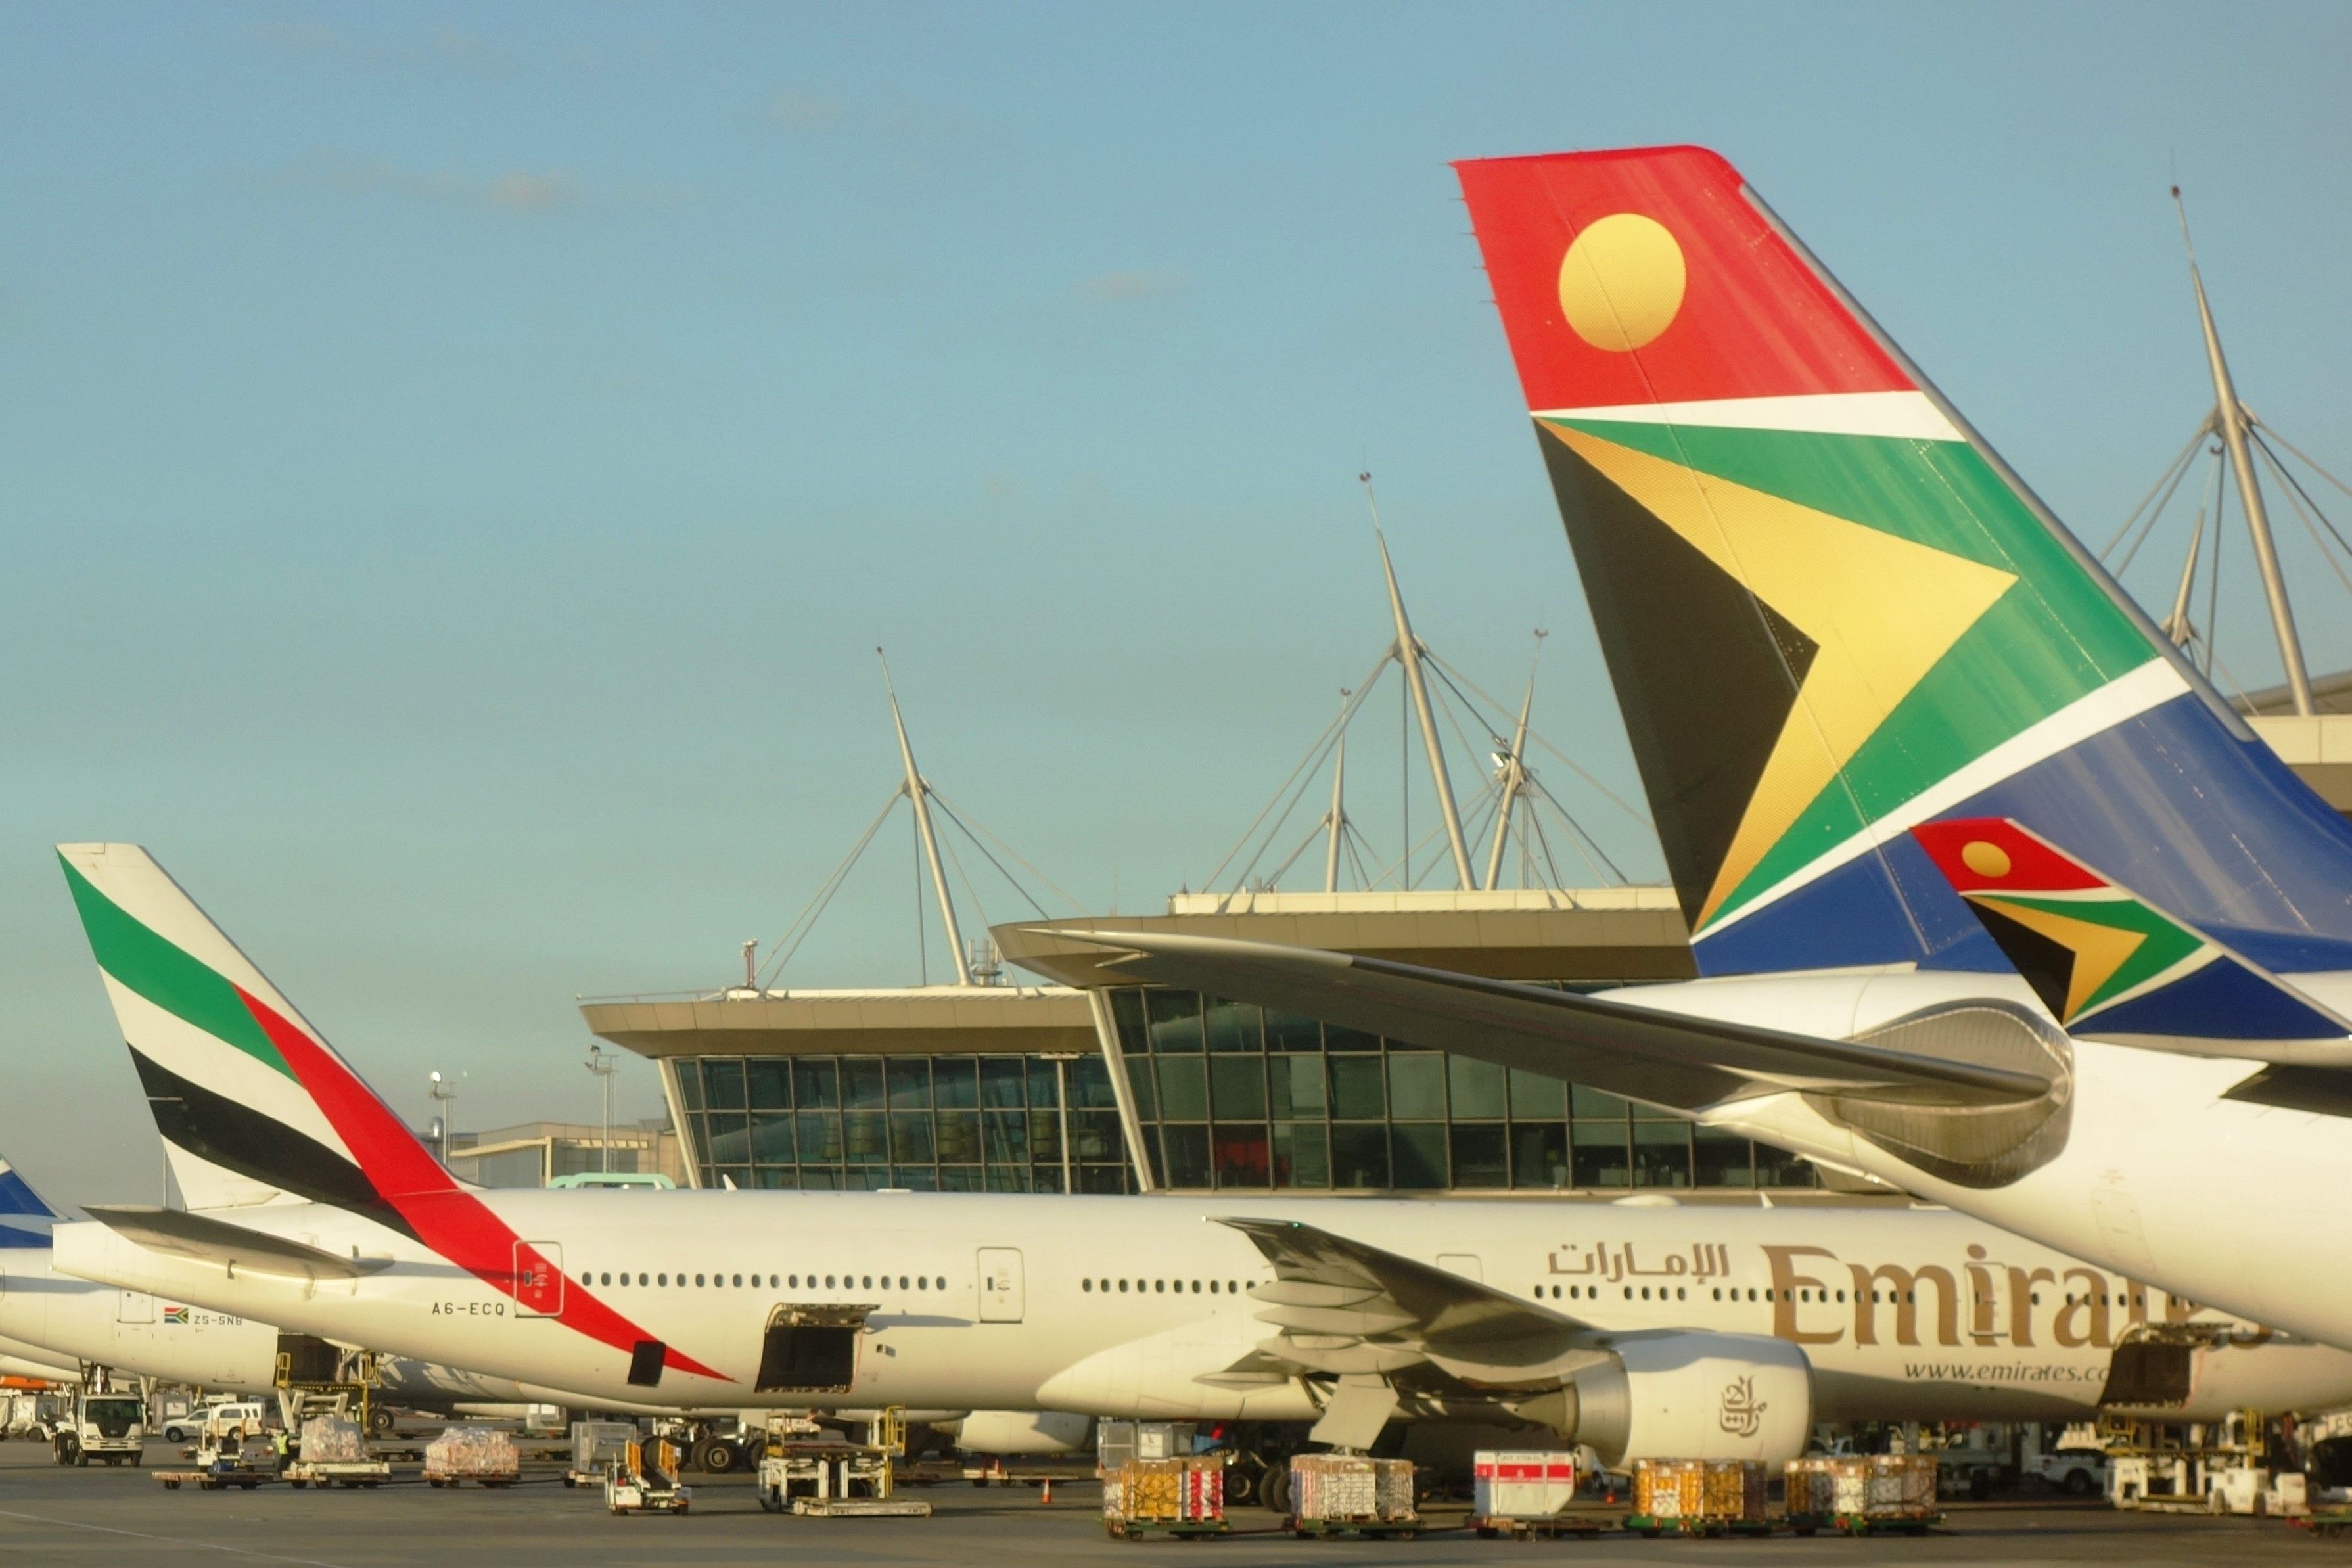 Aircraft tails at Johannesburg Airport